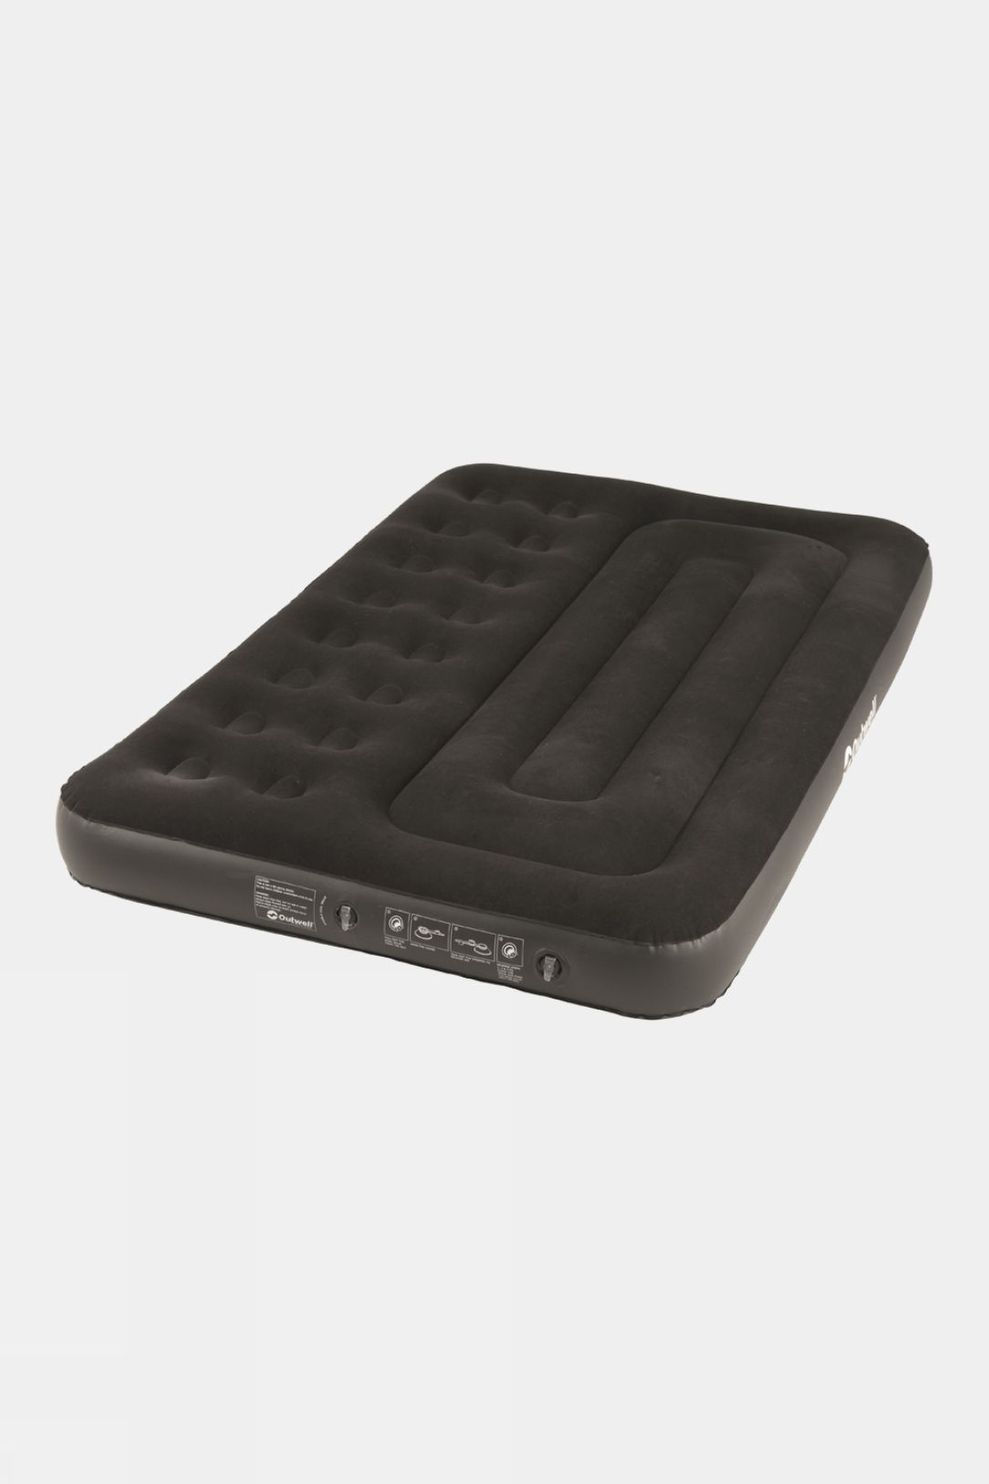 Outwell Flock Classic Two Chamber Airbed